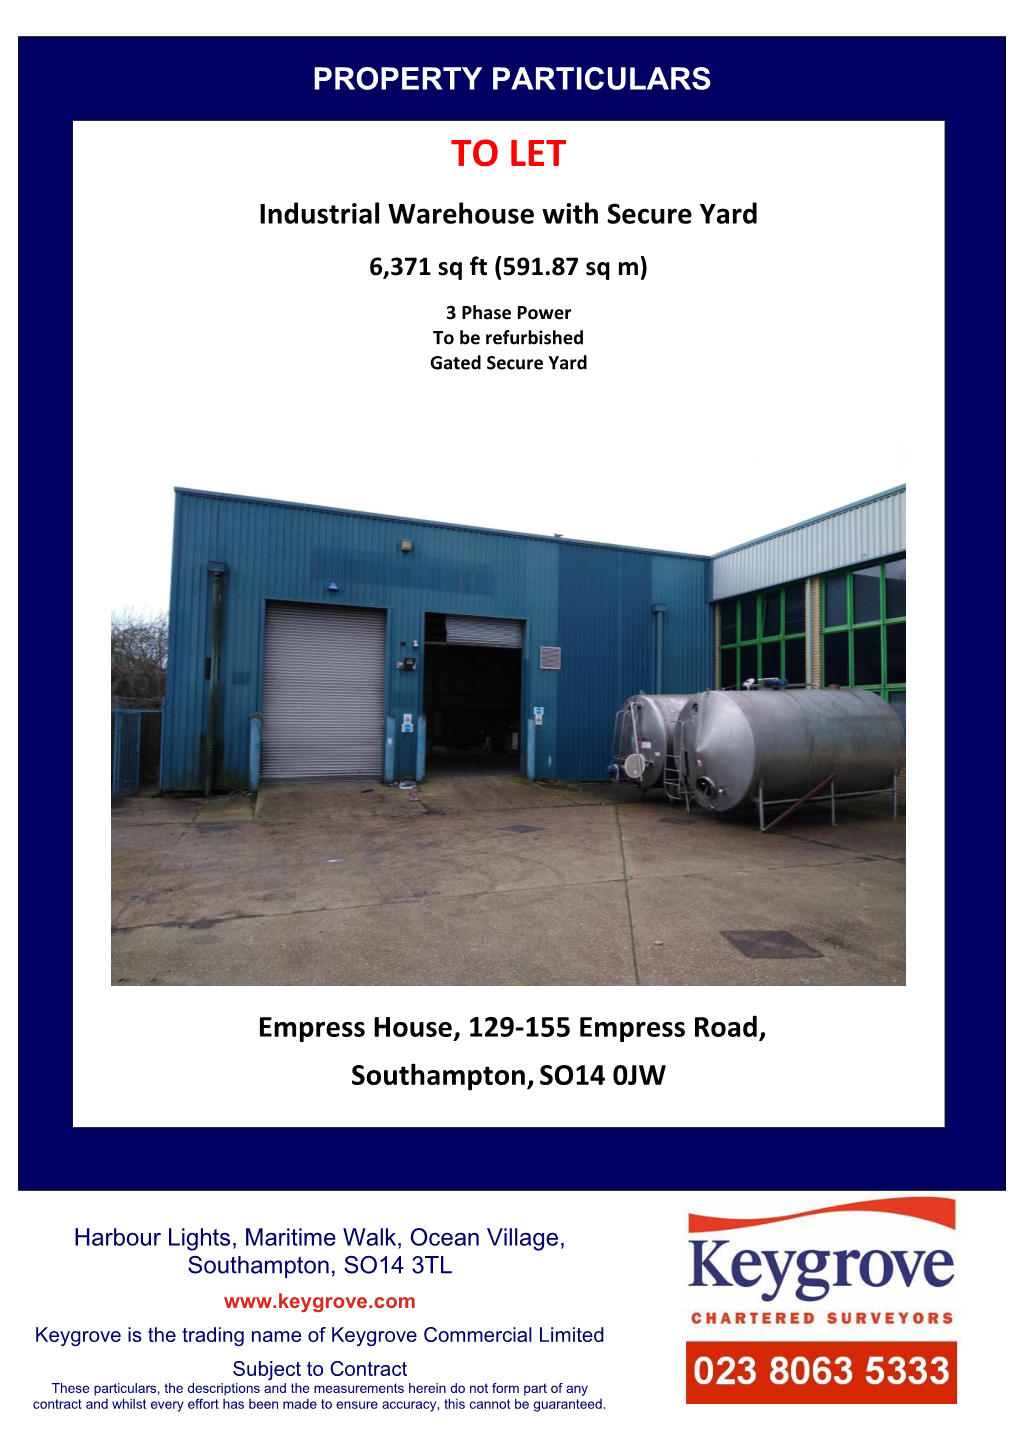 PROPERTY PARTICULARS to LET Industrial Warehouse with Secure Yard 6371 Sq Ft